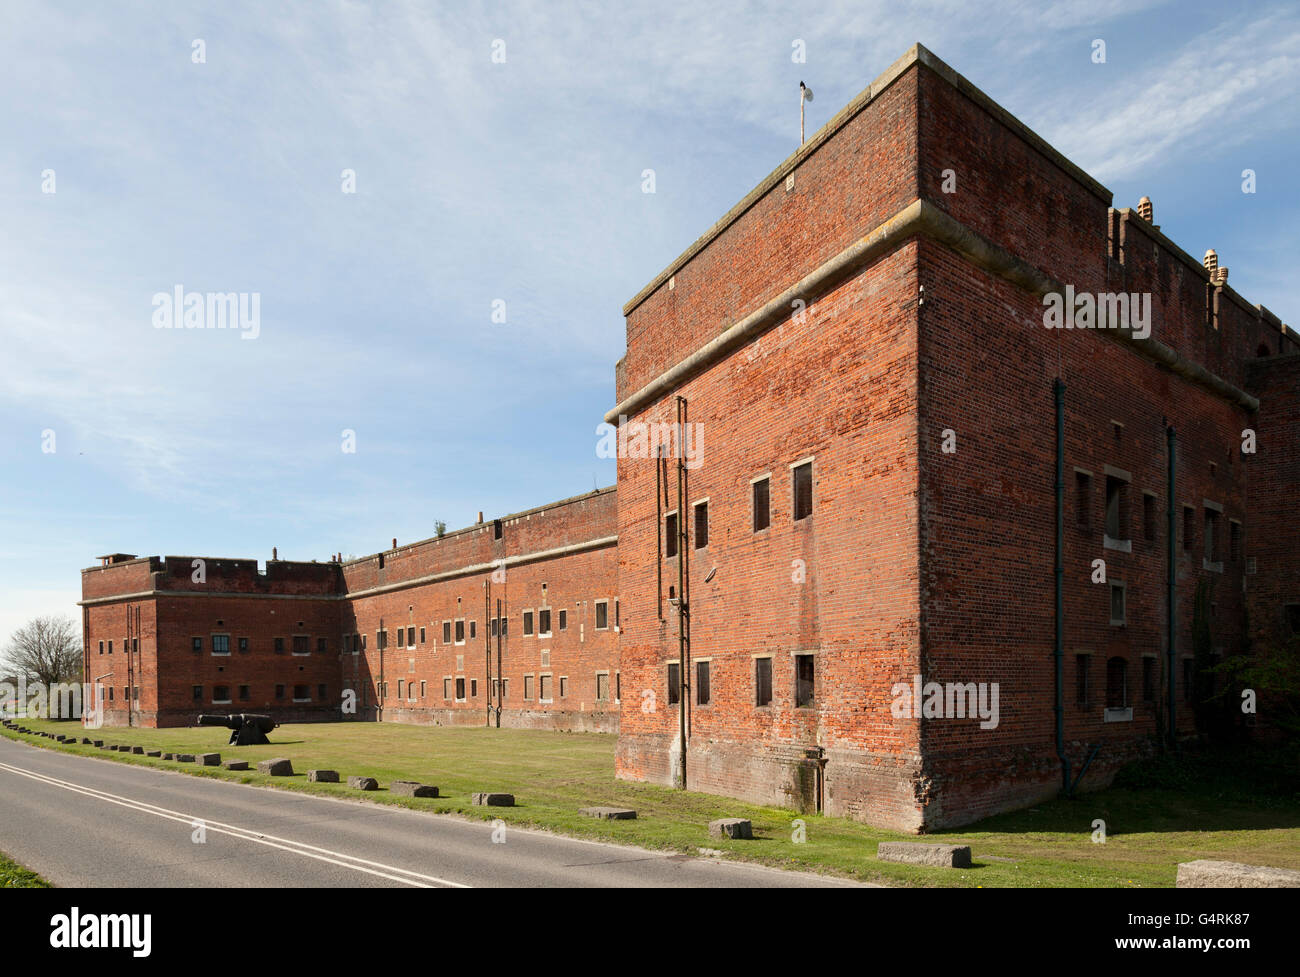 The Victorian Fort Widley on Portsdown Hill, Hampshire, England, United Kingdom, Europe Stock Photo